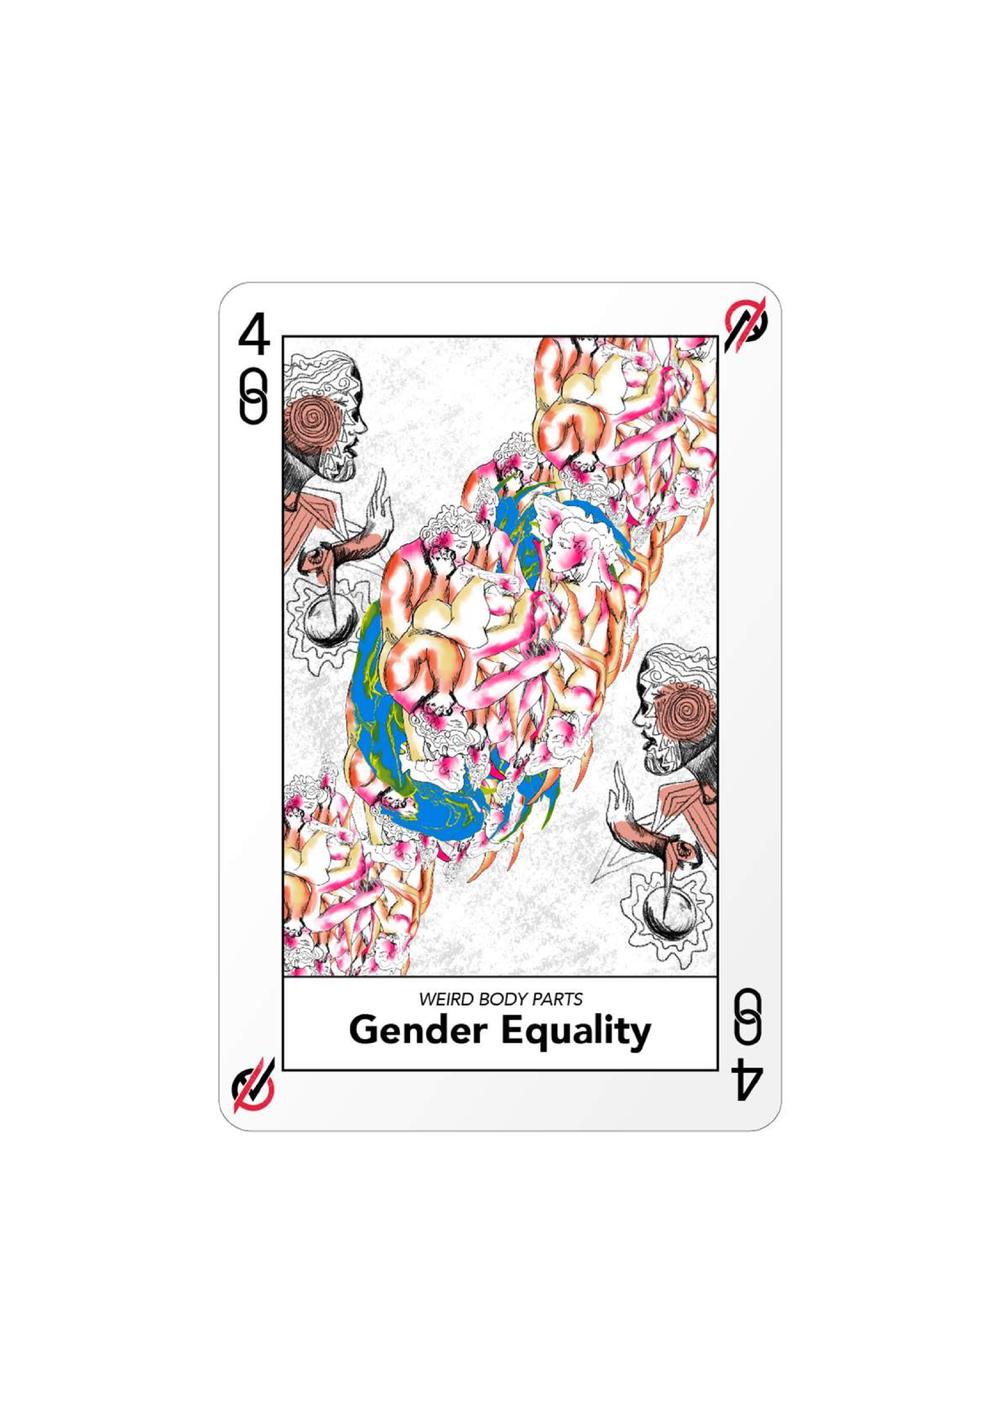 Certificate of Authenticity and Consignment - Gender Equality